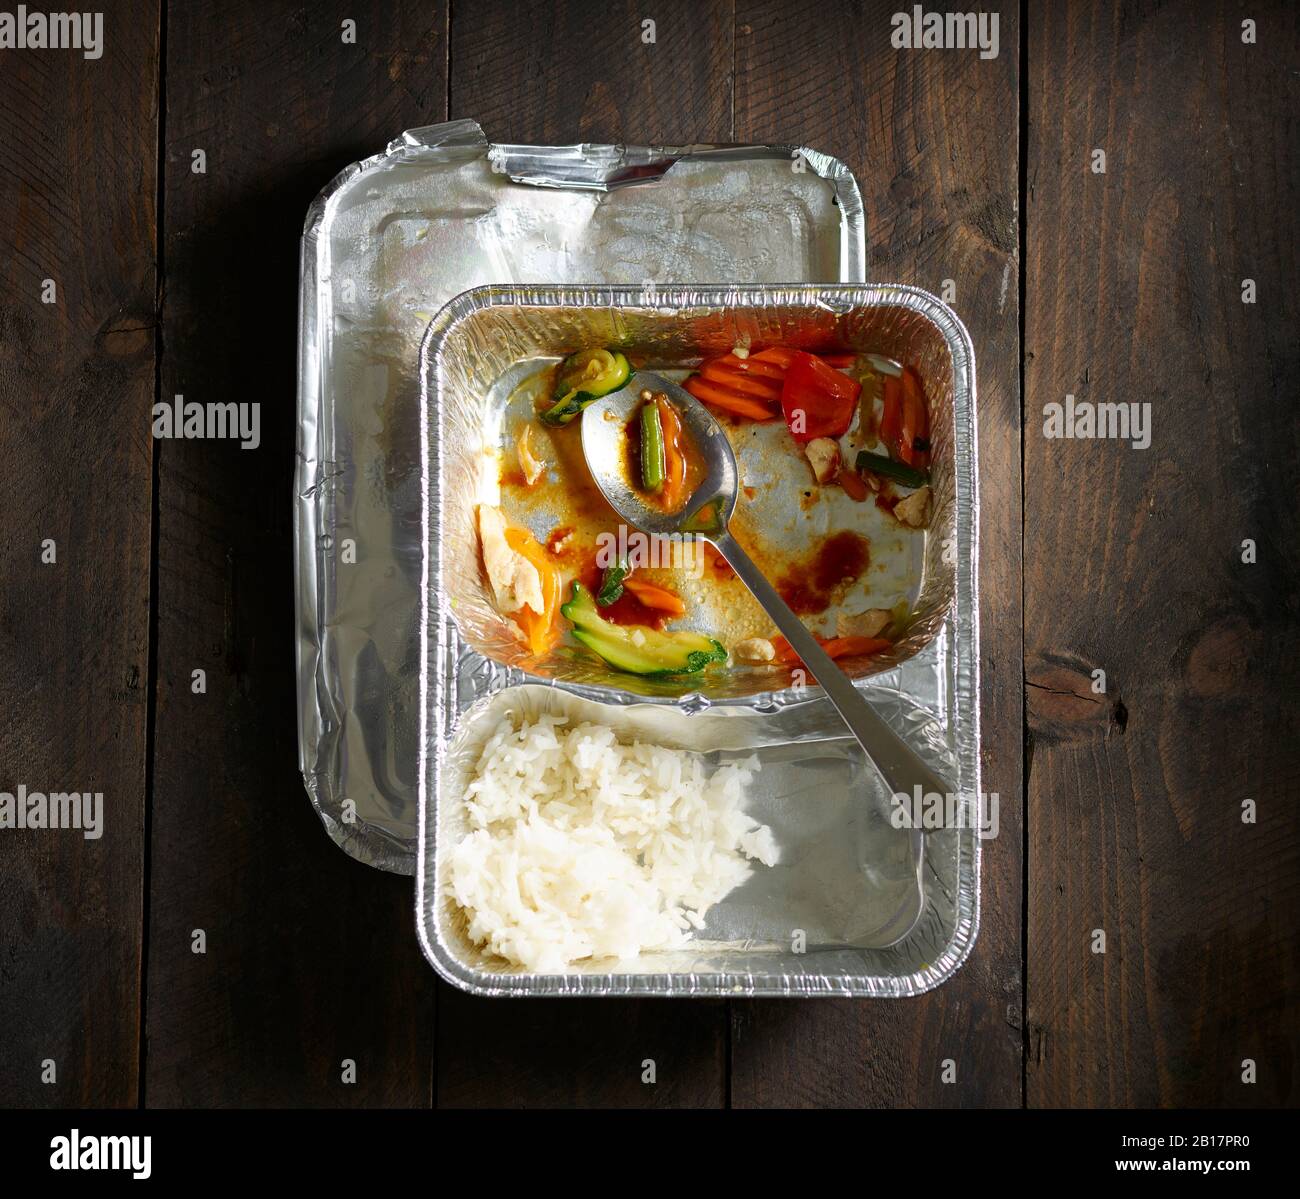 Half-eaten Chinese take out food Stock Photo